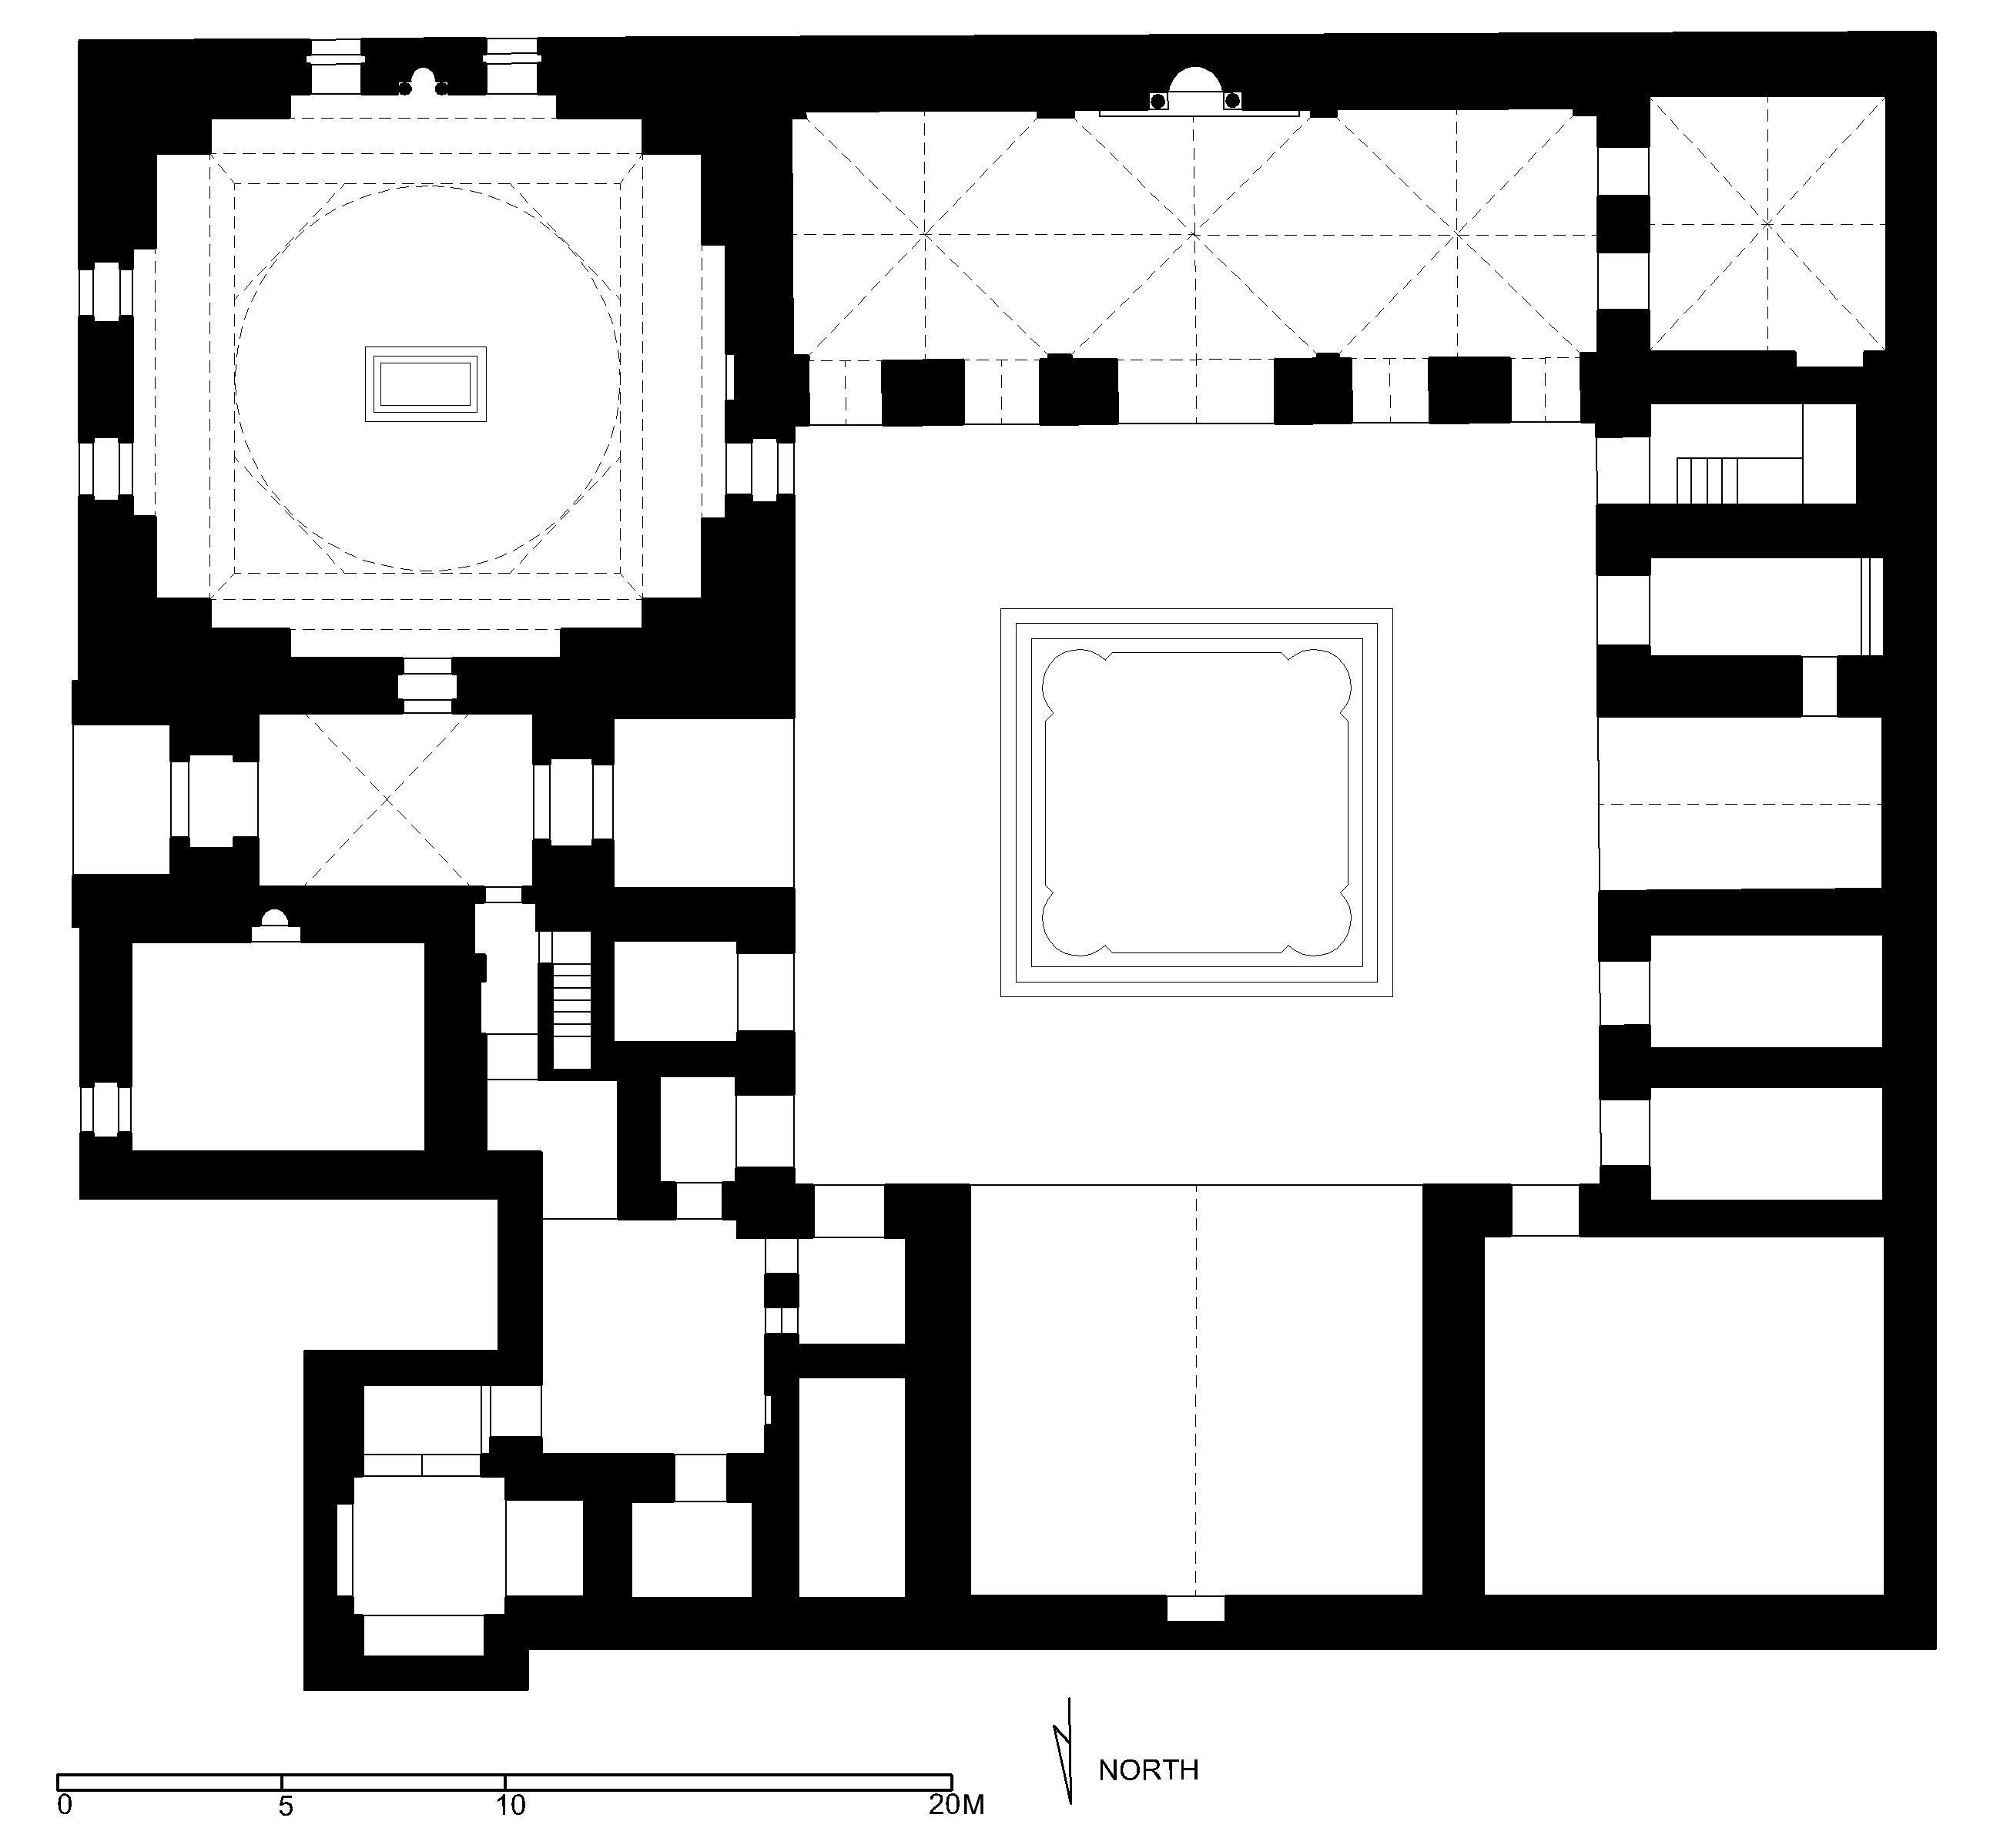 Madrasa al-'Adiliyya - Floor plan of madrasa (after Meinecke) in AutoCAD 2000 format. Click the download button to download a zipped file containing the .dwg file. 